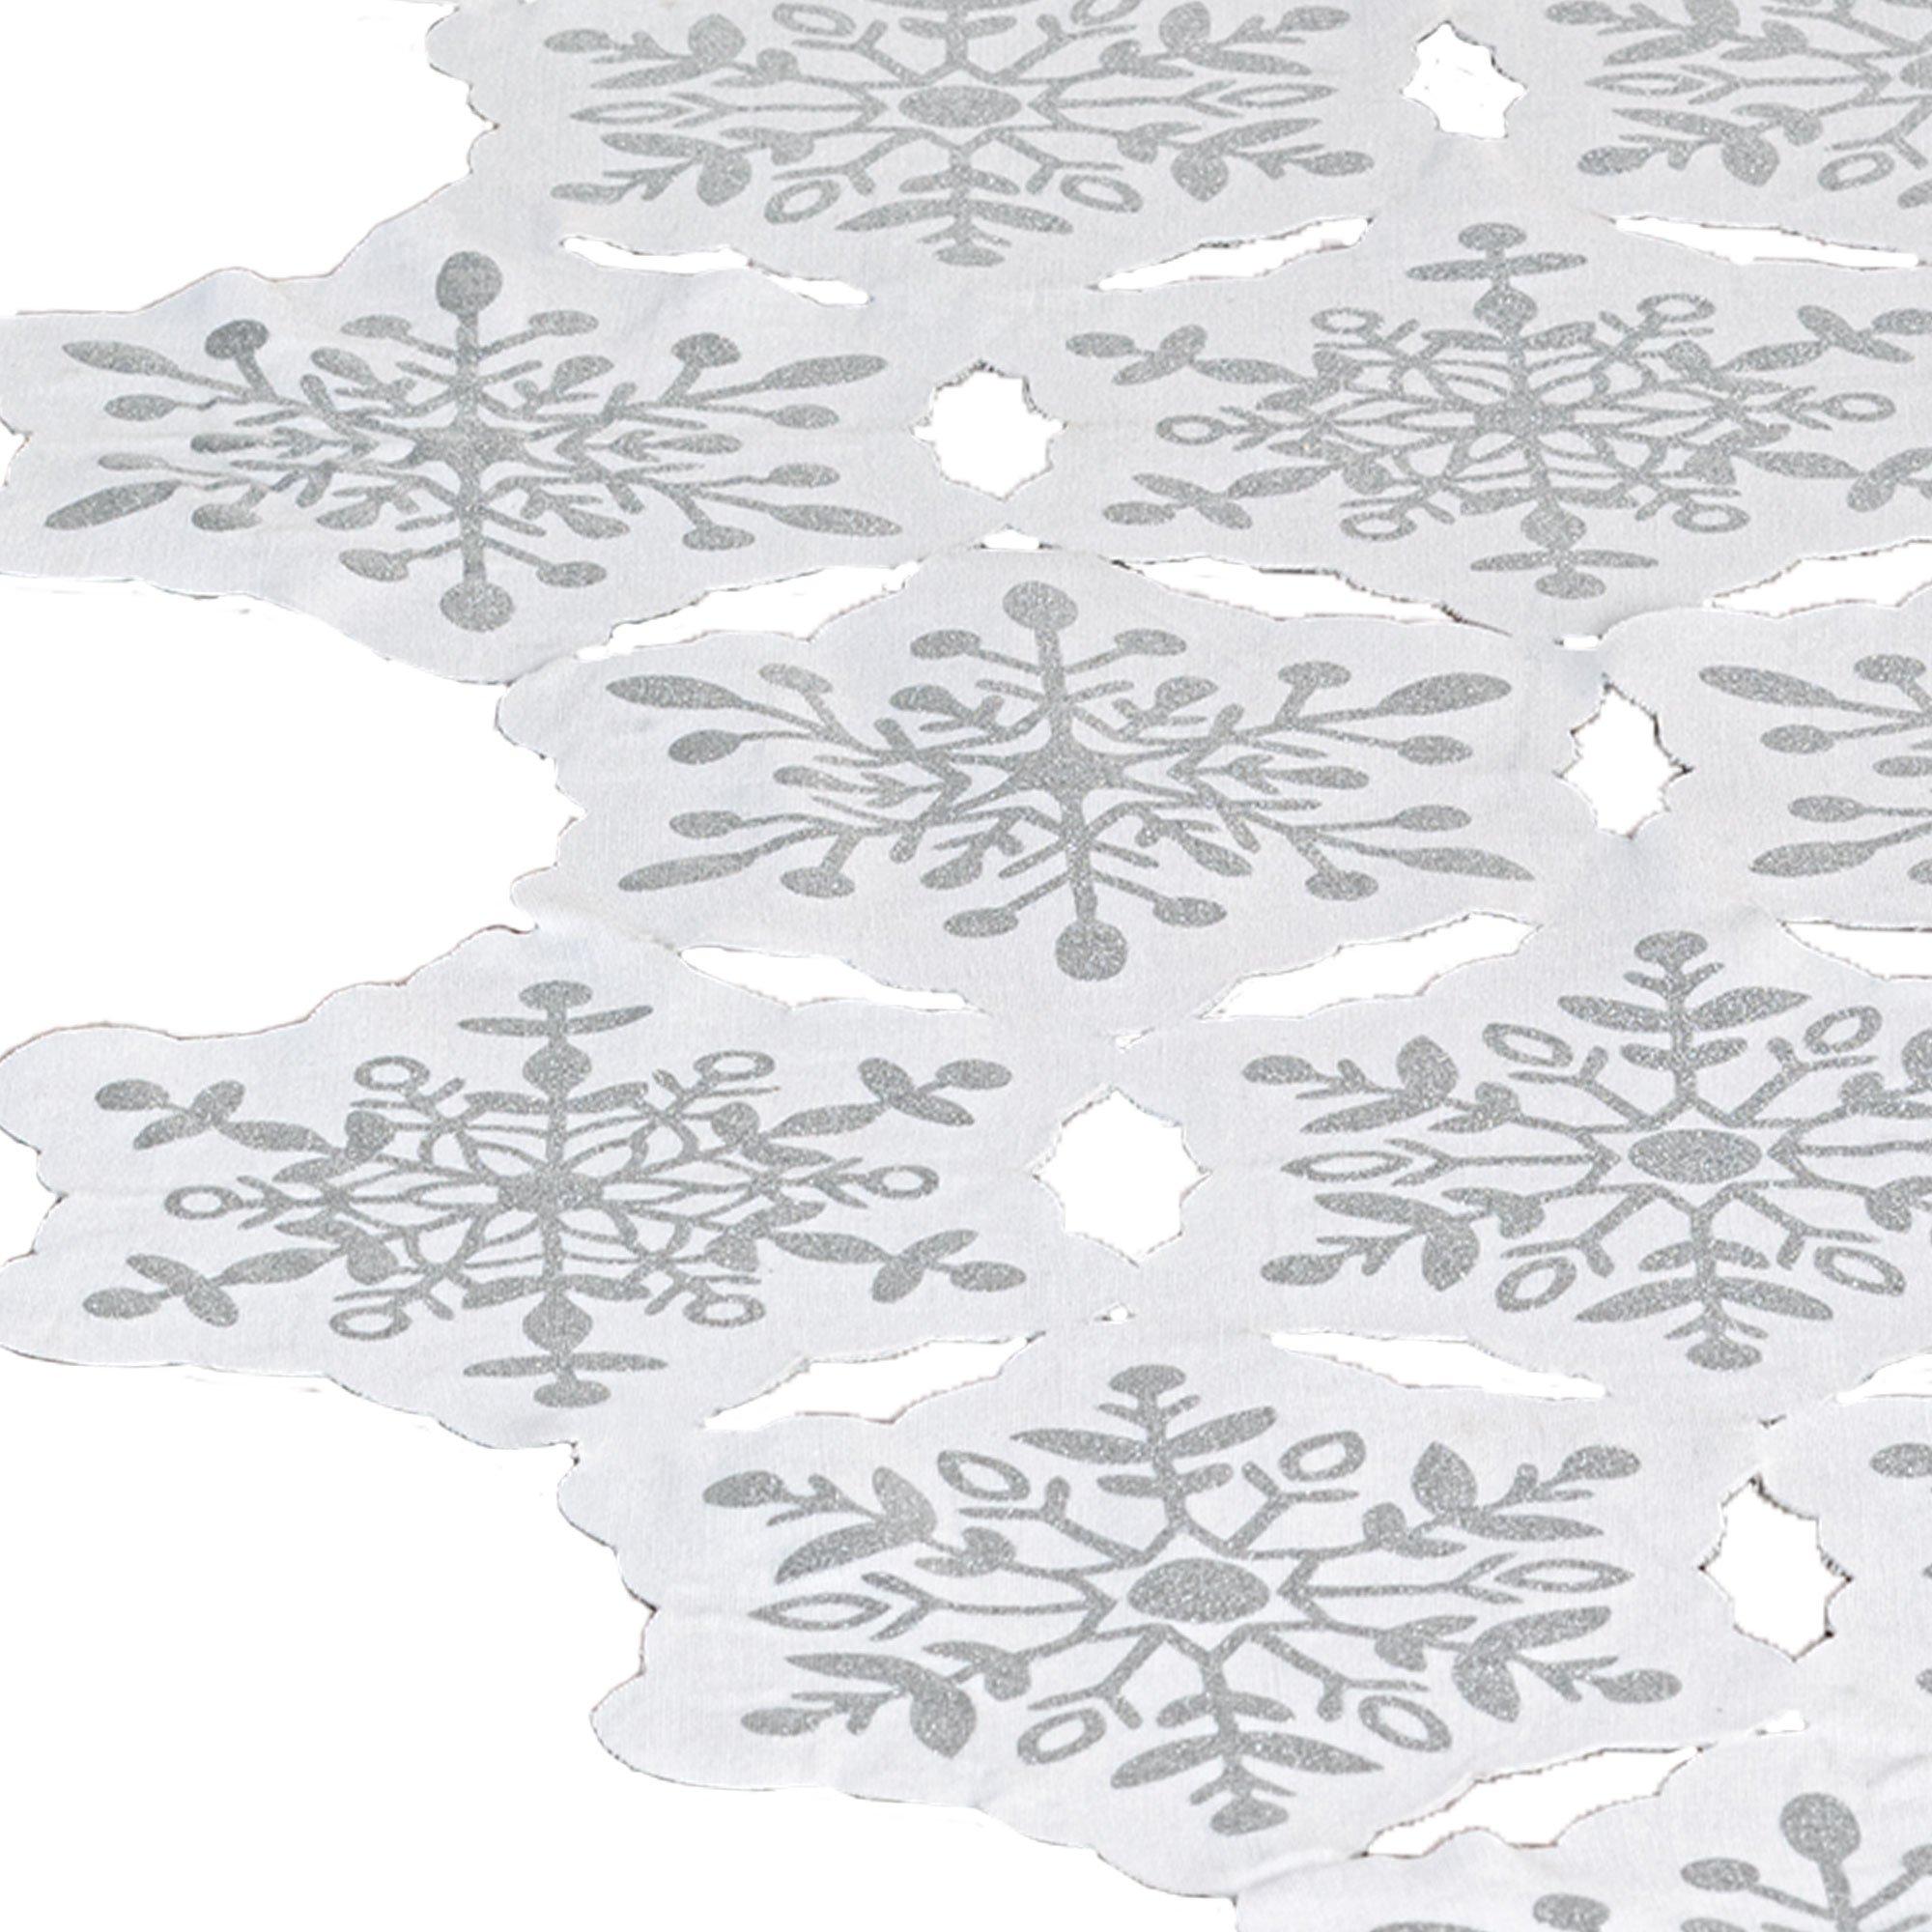 Snowflake Fabric Table Runner, 20.5in x 55in